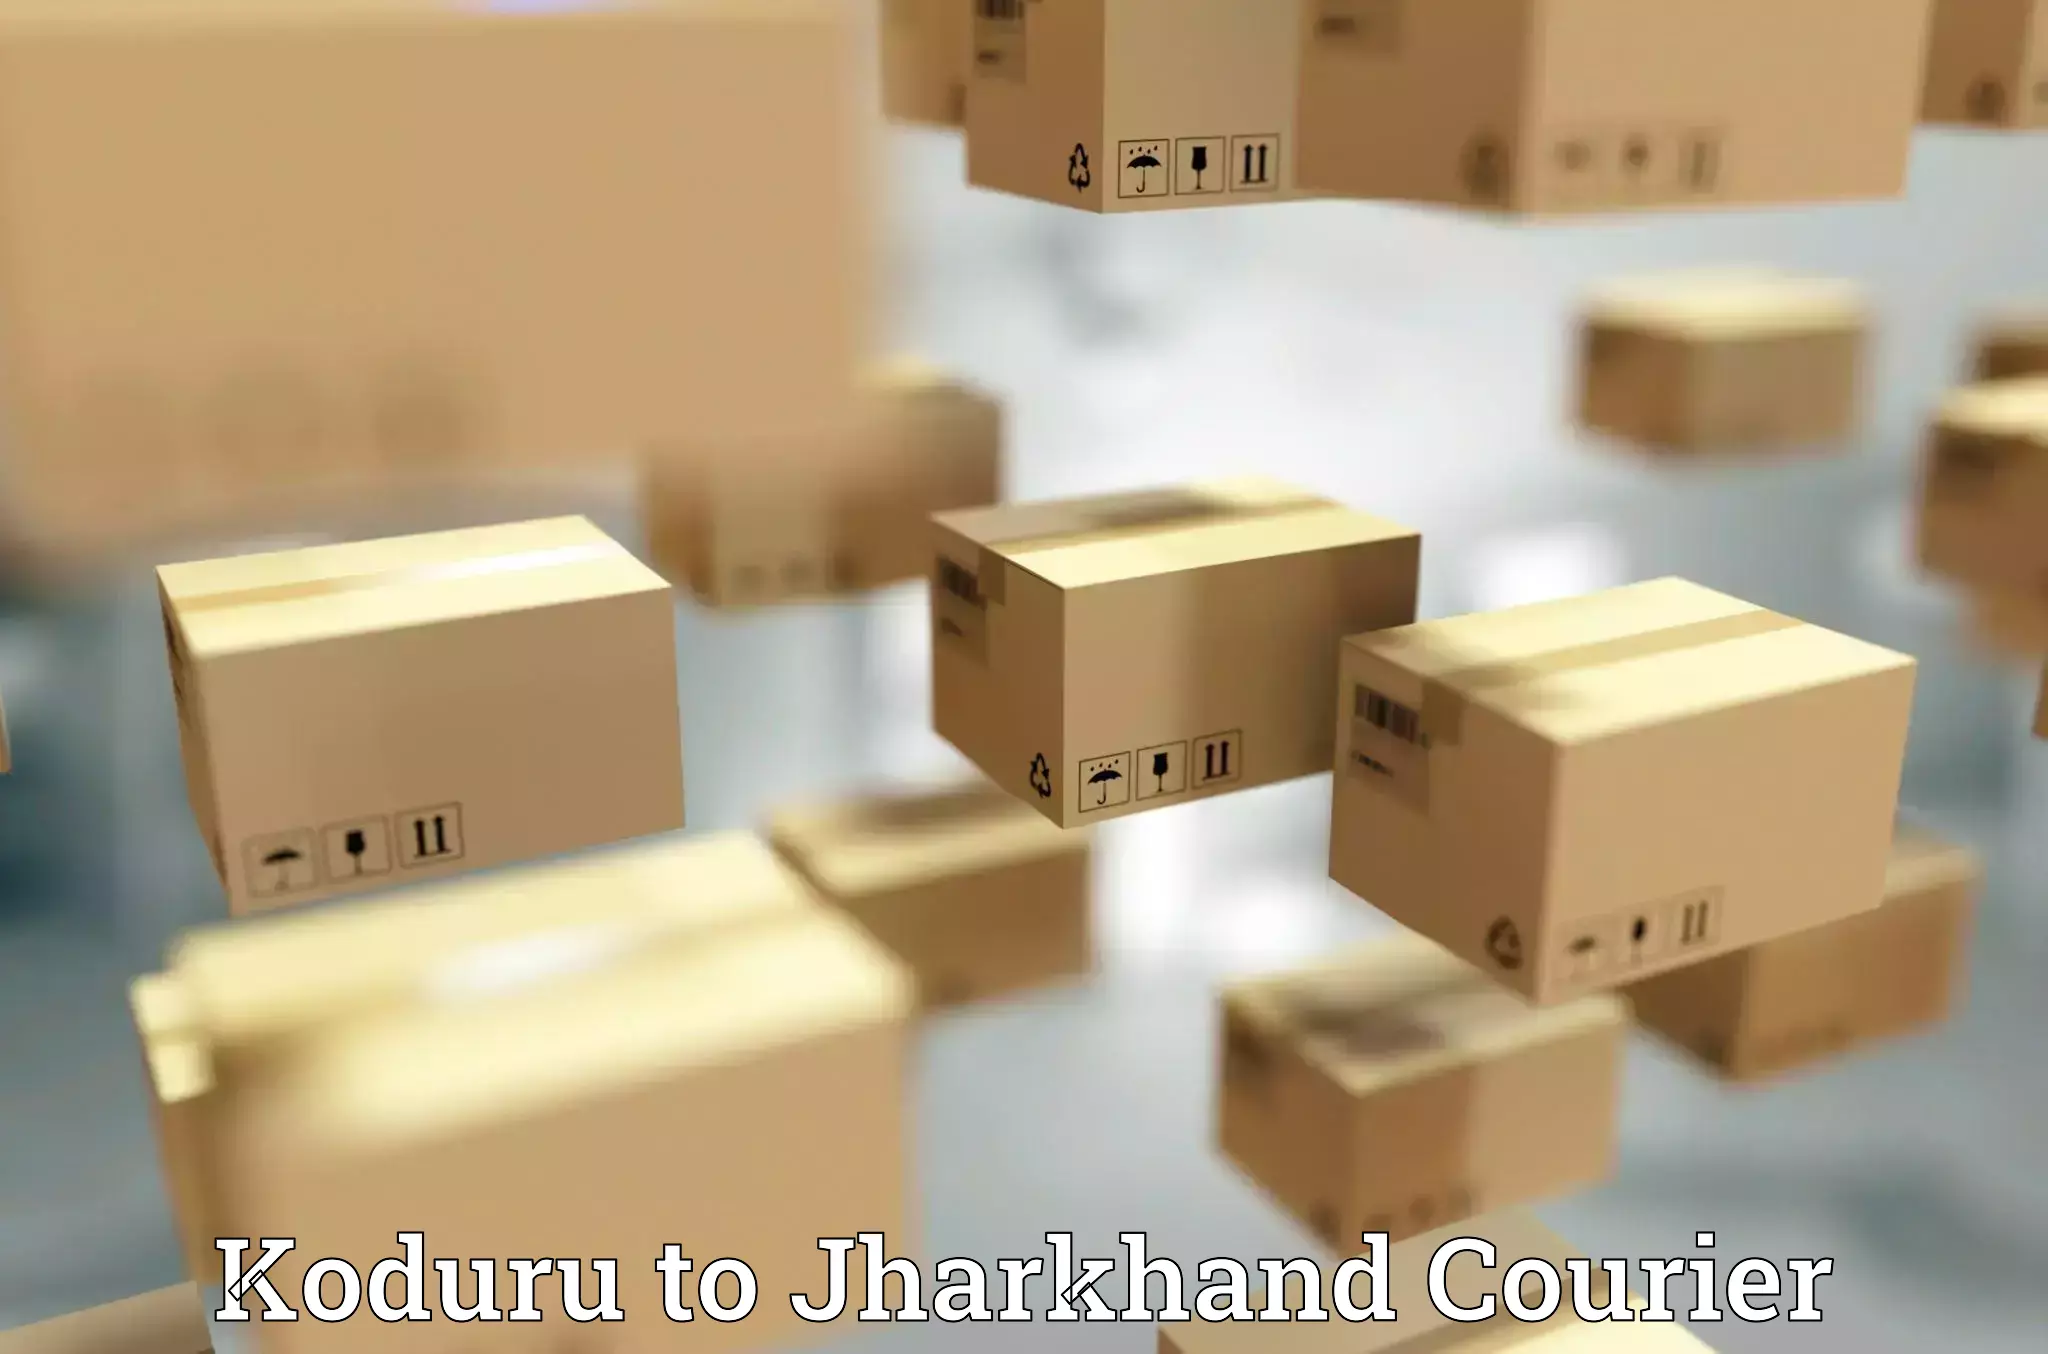 Sustainable delivery practices Koduru to Jharkhand